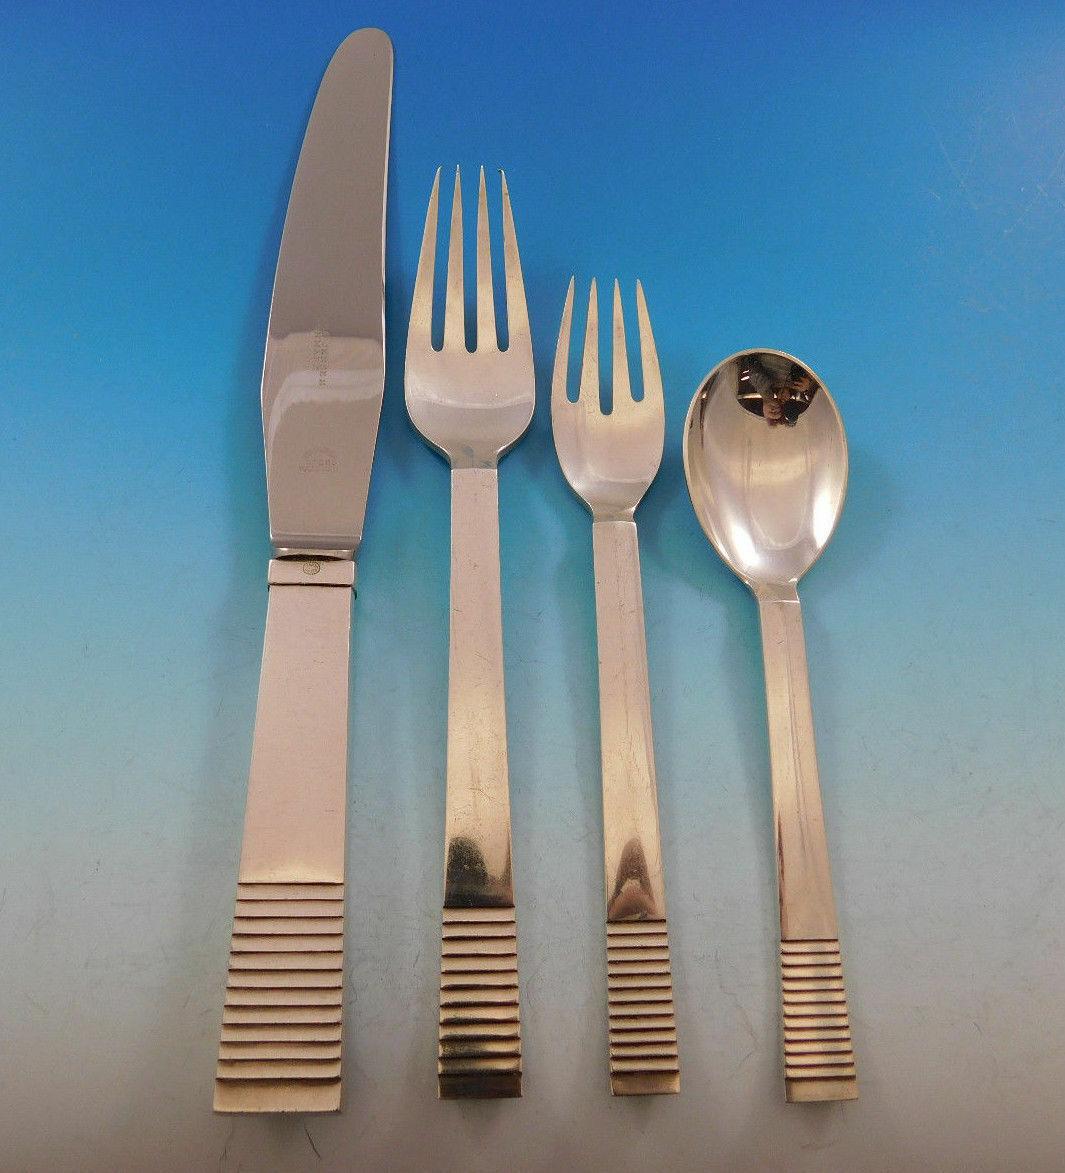 The parallel pattern was designed by O. Gundlach-Pedersen in 1931. Georg Jensen flatware is world renowned for its high quality, beauty, and elegance.

Outstanding dinner size parallel by Georg Jensen sterling silver flatware set, 88 pieces. This